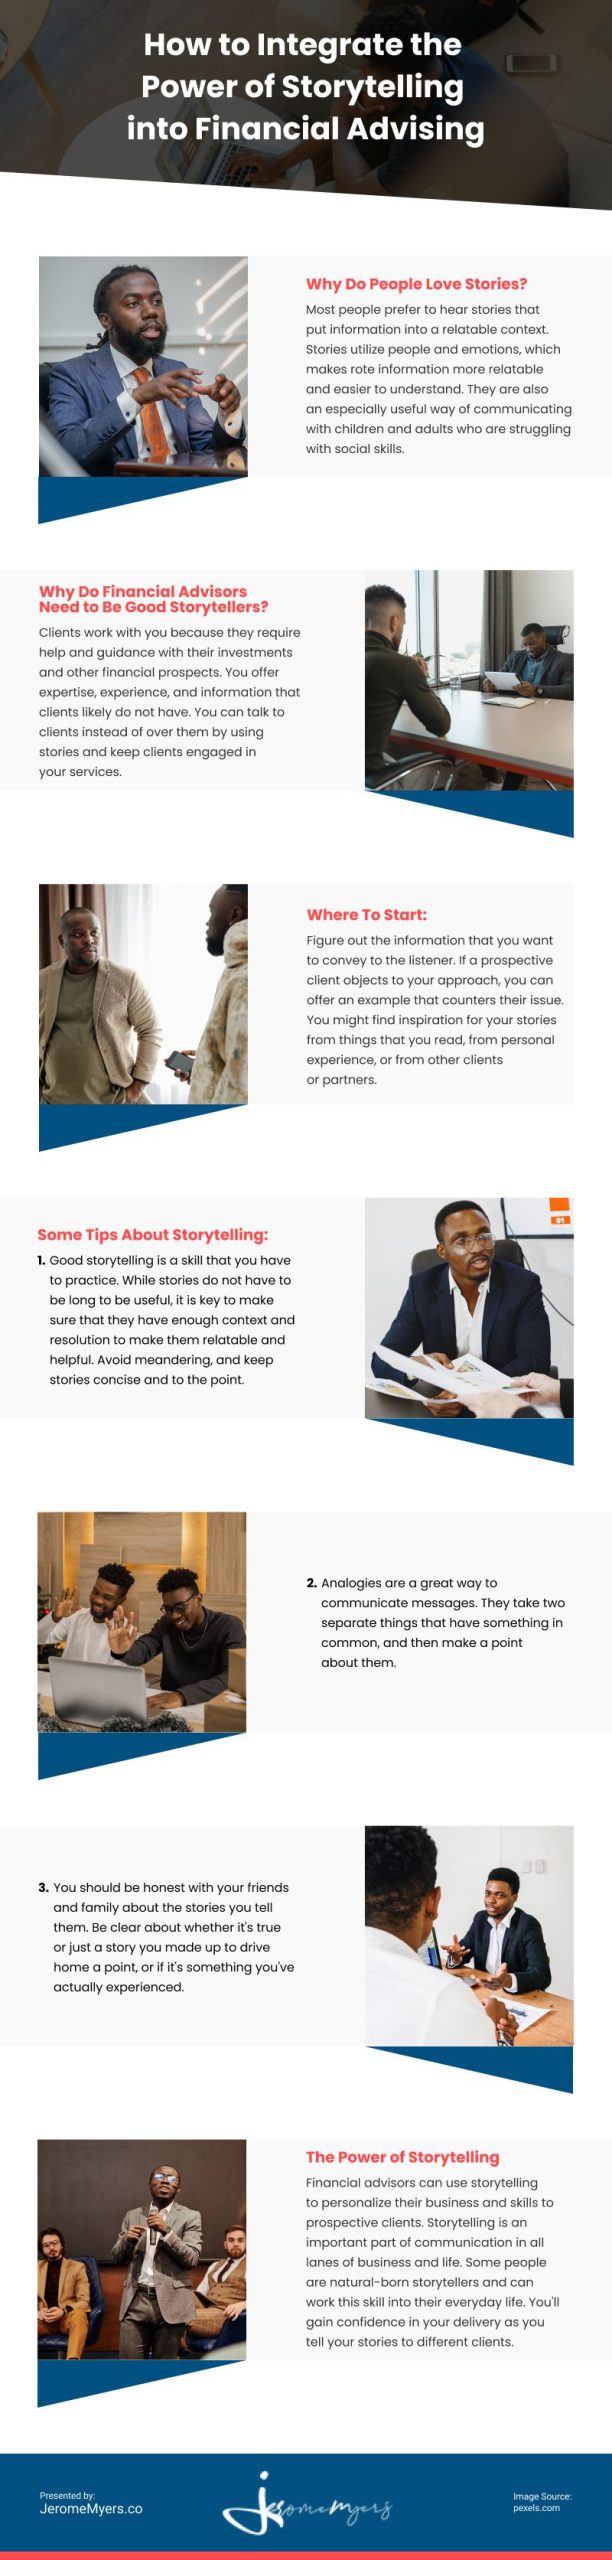 How to Integrate the Power of Storytelling into Financial Advising Infographic